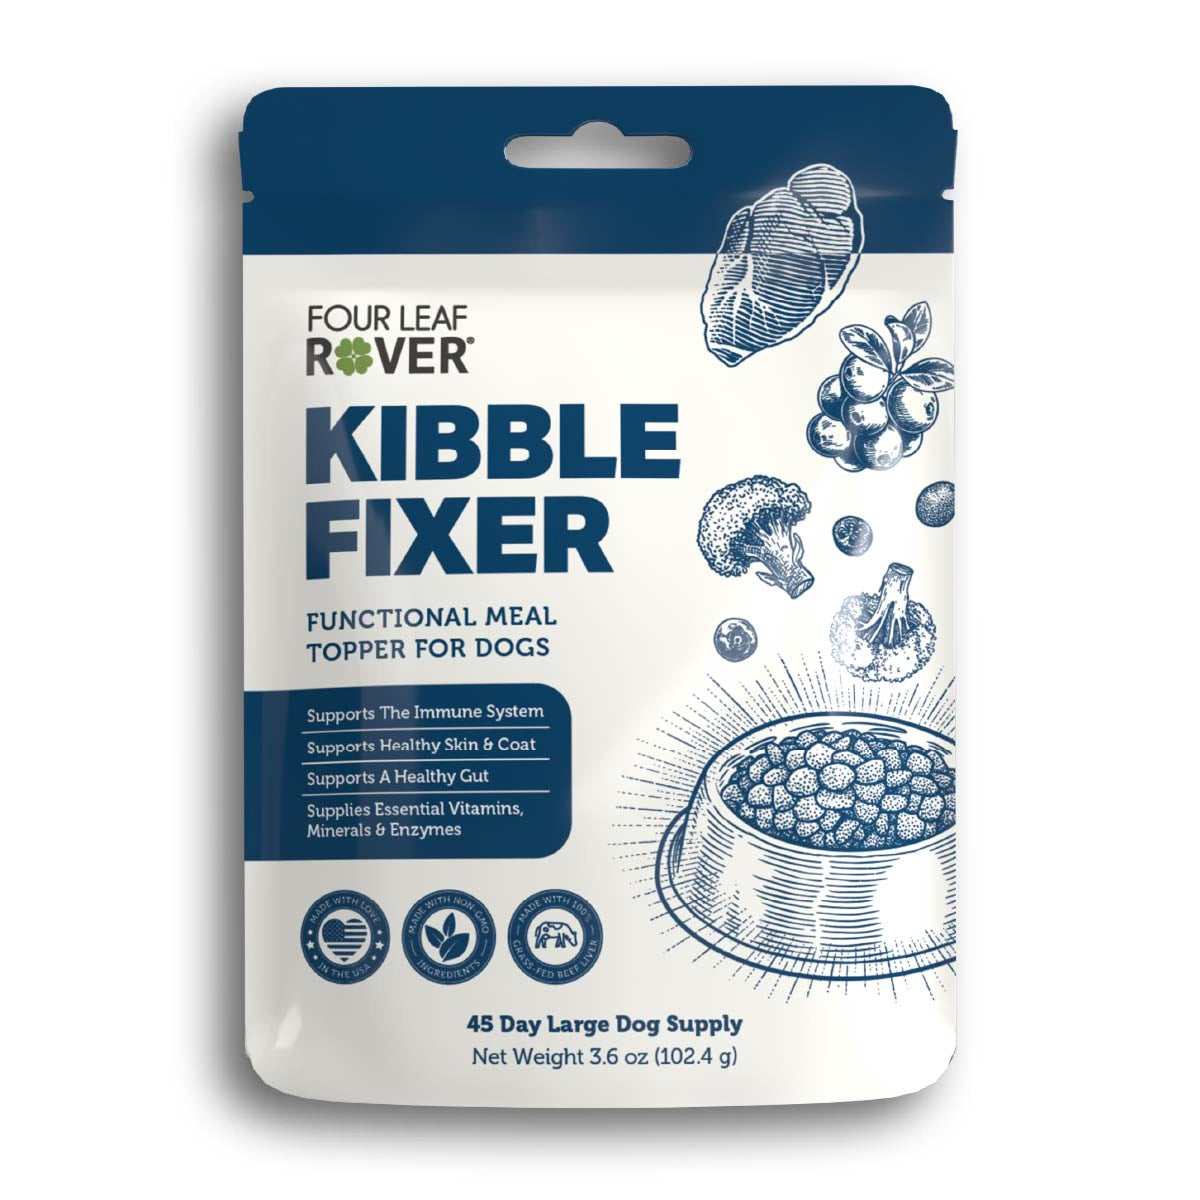 4LR Kibble Fixer - Functional Meal Topper for Dogs